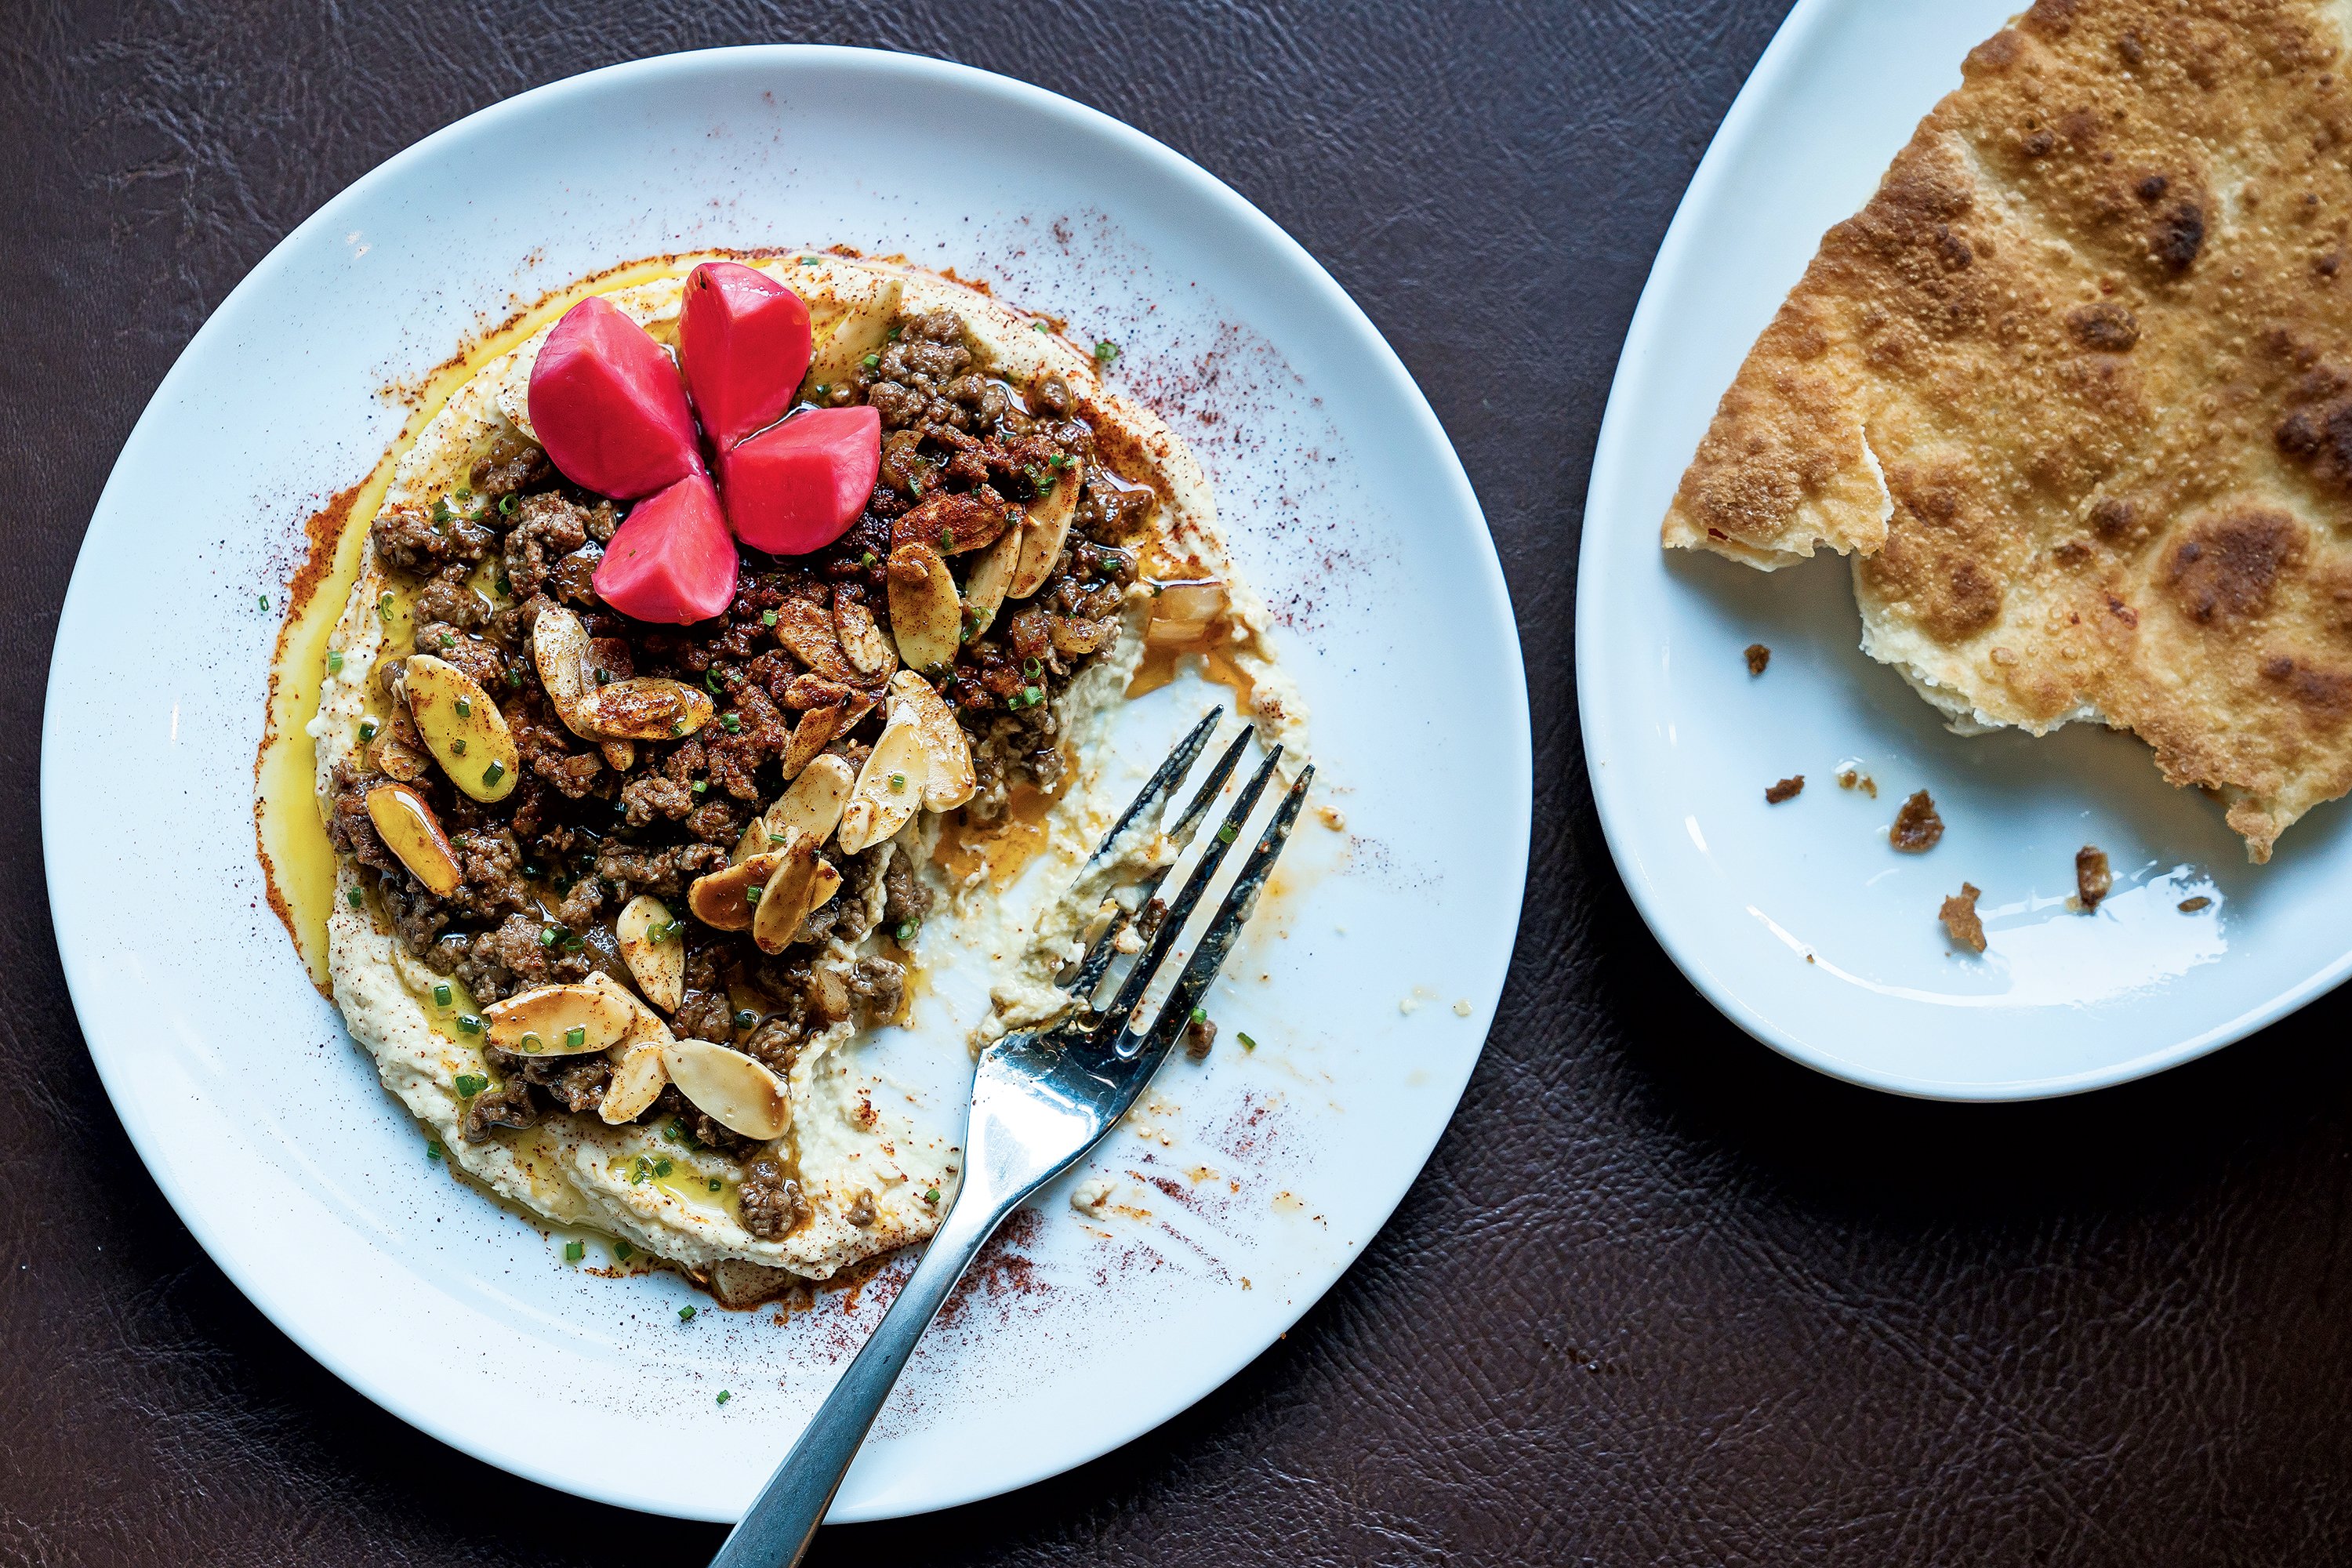 Hummus with sautéed beef and snowshoe naan at the eclectic new Chloe. Photograph by Scott Suchman.